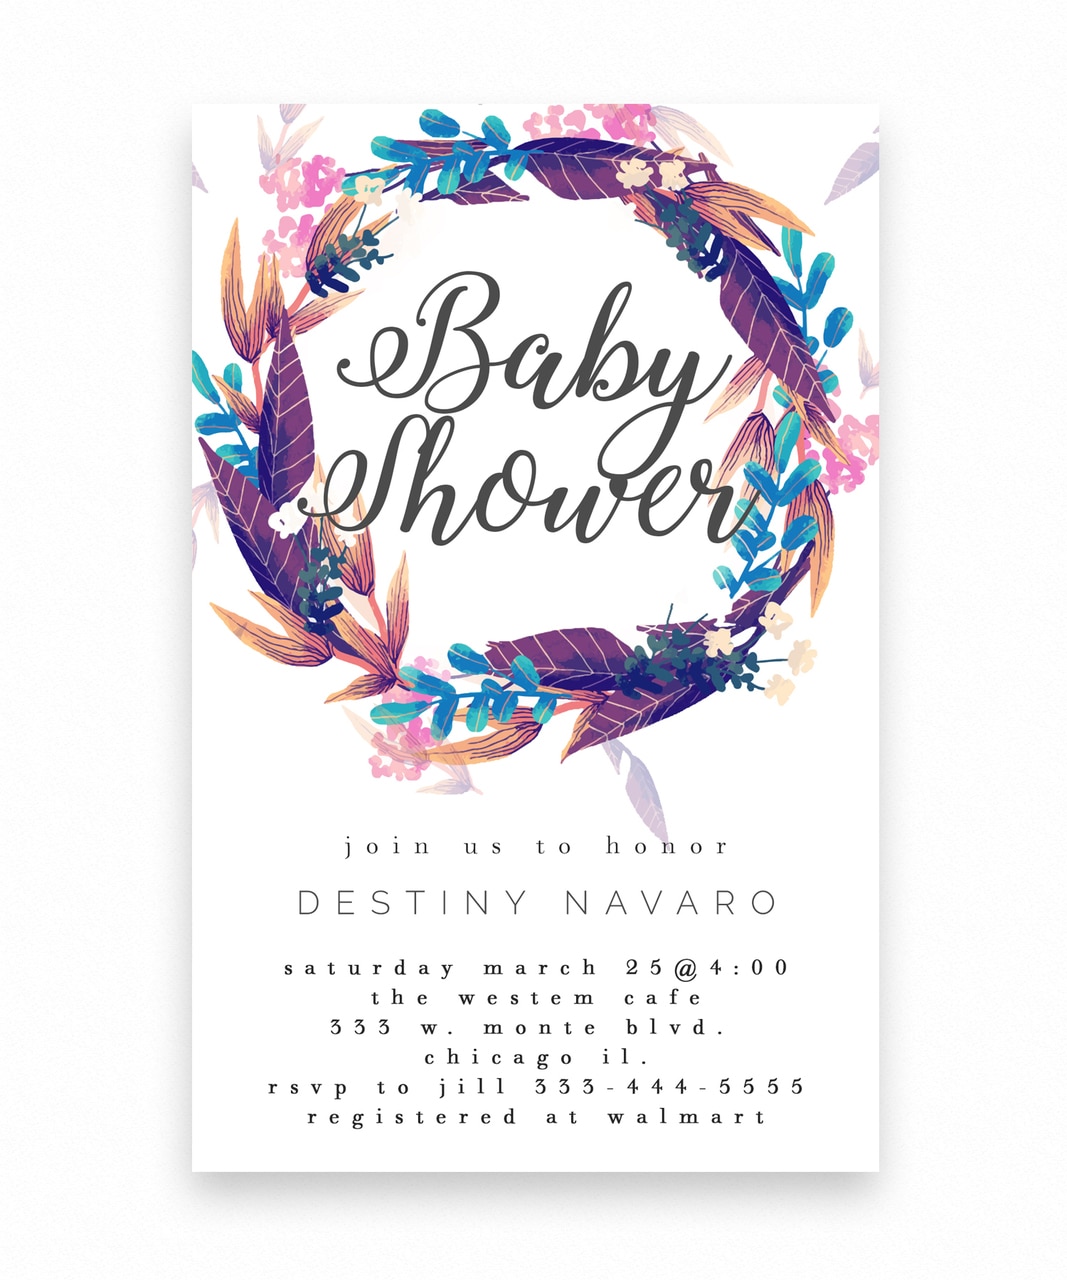 Full Size of Baby Shower:63+ Delightful Cheap Baby Shower Invitations Image Inspirations Cheap Baby Shower Invitations Baby Shower Party Themes Baby Shower Props Baby Shower Stuff Baby Shower Restaurants Baby Shower Favors To Make Boho Floral Wreath Baby Shower Invitation